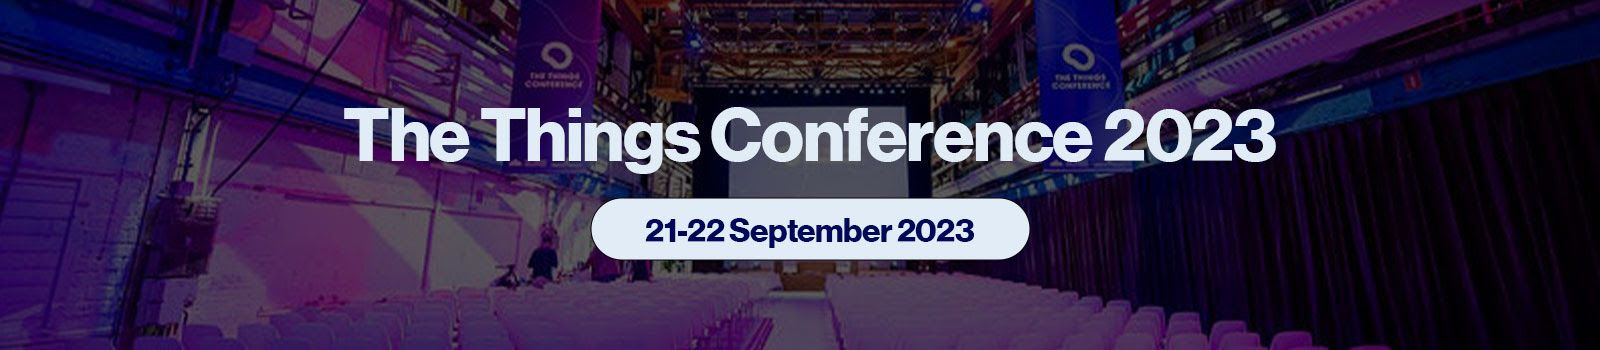 The Things Conference 2023